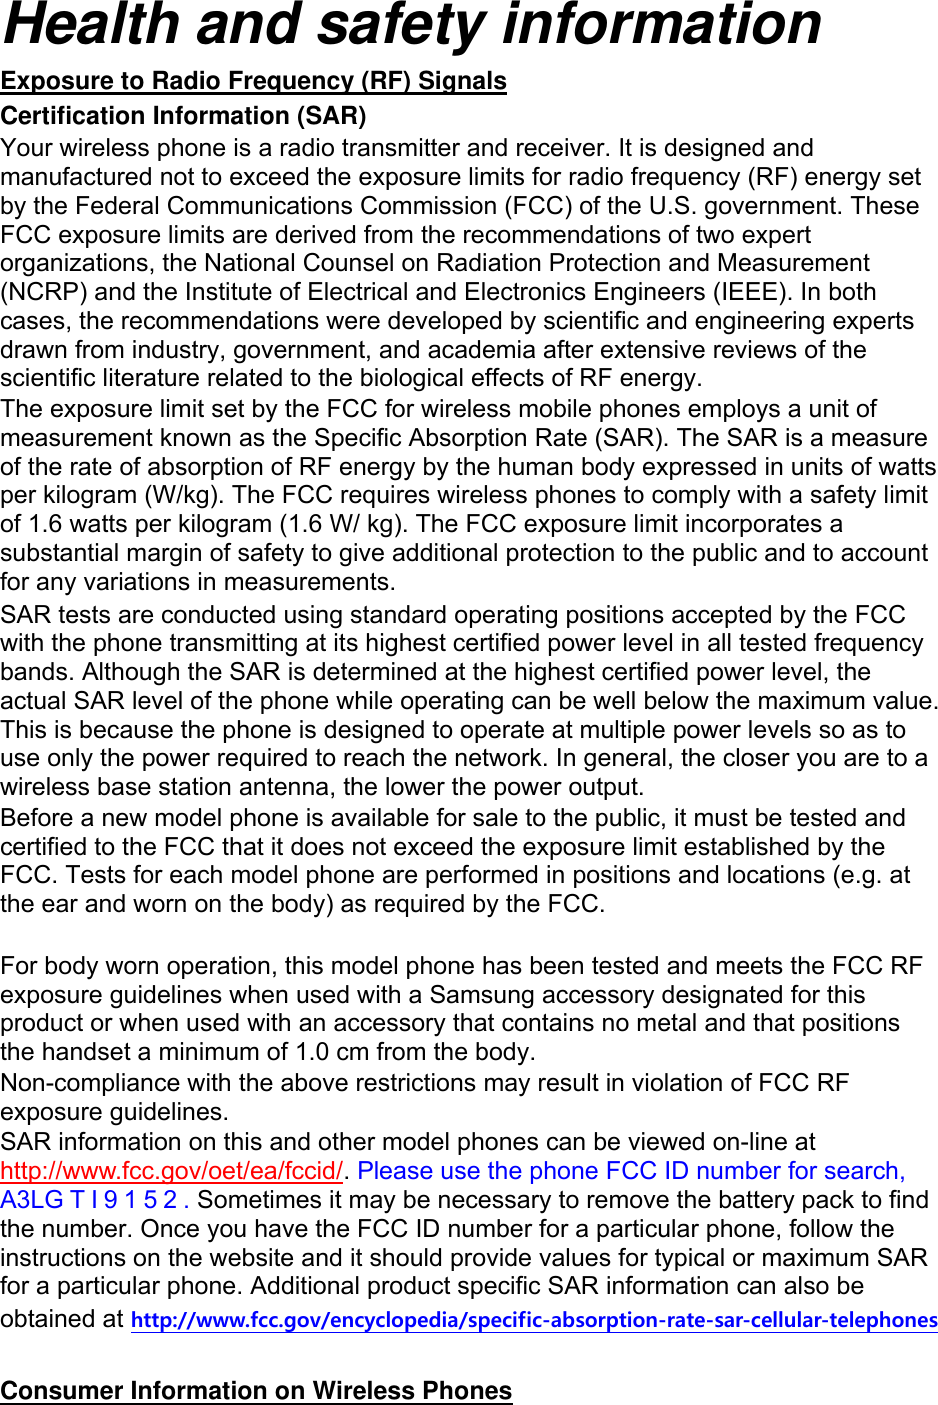 Health and safety information Exposure to Radio Frequency (RF) Signals Certification Information (SAR) Your wireless phone is a radio transmitter and receiver. It is designed and manufactured not to exceed the exposure limits for radio frequency (RF) energy set by the Federal Communications Commission (FCC) of the U.S. government. These FCC exposure limits are derived from the recommendations of two expert organizations, the National Counsel on Radiation Protection and Measurement (NCRP) and the Institute of Electrical and Electronics Engineers (IEEE). In both cases, the recommendations were developed by scientific and engineering experts drawn from industry, government, and academia after extensive reviews of the scientific literature related to the biological effects of RF energy. The exposure limit set by the FCC for wireless mobile phones employs a unit of measurement known as the Specific Absorption Rate (SAR). The SAR is a measure of the rate of absorption of RF energy by the human body expressed in units of watts per kilogram (W/kg). The FCC requires wireless phones to comply with a safety limit of 1.6 watts per kilogram (1.6 W/ kg). The FCC exposure limit incorporates a substantial margin of safety to give additional protection to the public and to account for any variations in measurements. SAR tests are conducted using standard operating positions accepted by the FCC with the phone transmitting at its highest certified power level in all tested frequency bands. Although the SAR is determined at the highest certified power level, the actual SAR level of the phone while operating can be well below the maximum value. This is because the phone is designed to operate at multiple power levels so as to use only the power required to reach the network. In general, the closer you are to a wireless base station antenna, the lower the power output. Before a new model phone is available for sale to the public, it must be tested and certified to the FCC that it does not exceed the exposure limit established by the FCC. Tests for each model phone are performed in positions and locations (e.g. at the ear and worn on the body) as required by the FCC.      For body worn operation, this model phone has been tested and meets the FCC RF exposure guidelines when used with a Samsung accessory designated for this product or when used with an accessory that contains no metal and that positions the handset a minimum of 1.0 cm from the body.   Non-compliance with the above restrictions may result in violation of FCC RF exposure guidelines. SAR information on this and other model phones can be viewed on-line at http://www.fcc.gov/oet/ea/fccid/. Please use the phone FCC ID number for search, A3LGTI9152. Sometimes it may be necessary to remove the battery pack to find the number. Once you have the FCC ID number for a particular phone, follow the instructions on the website and it should provide values for typical or maximum SAR for a particular phone. Additional product specific SAR information can also be obtained at http://www.fcc.gov/encyclopedia/specific-absorption-rate-sar-cellular-telephones  Consumer Information on Wireless Phones 